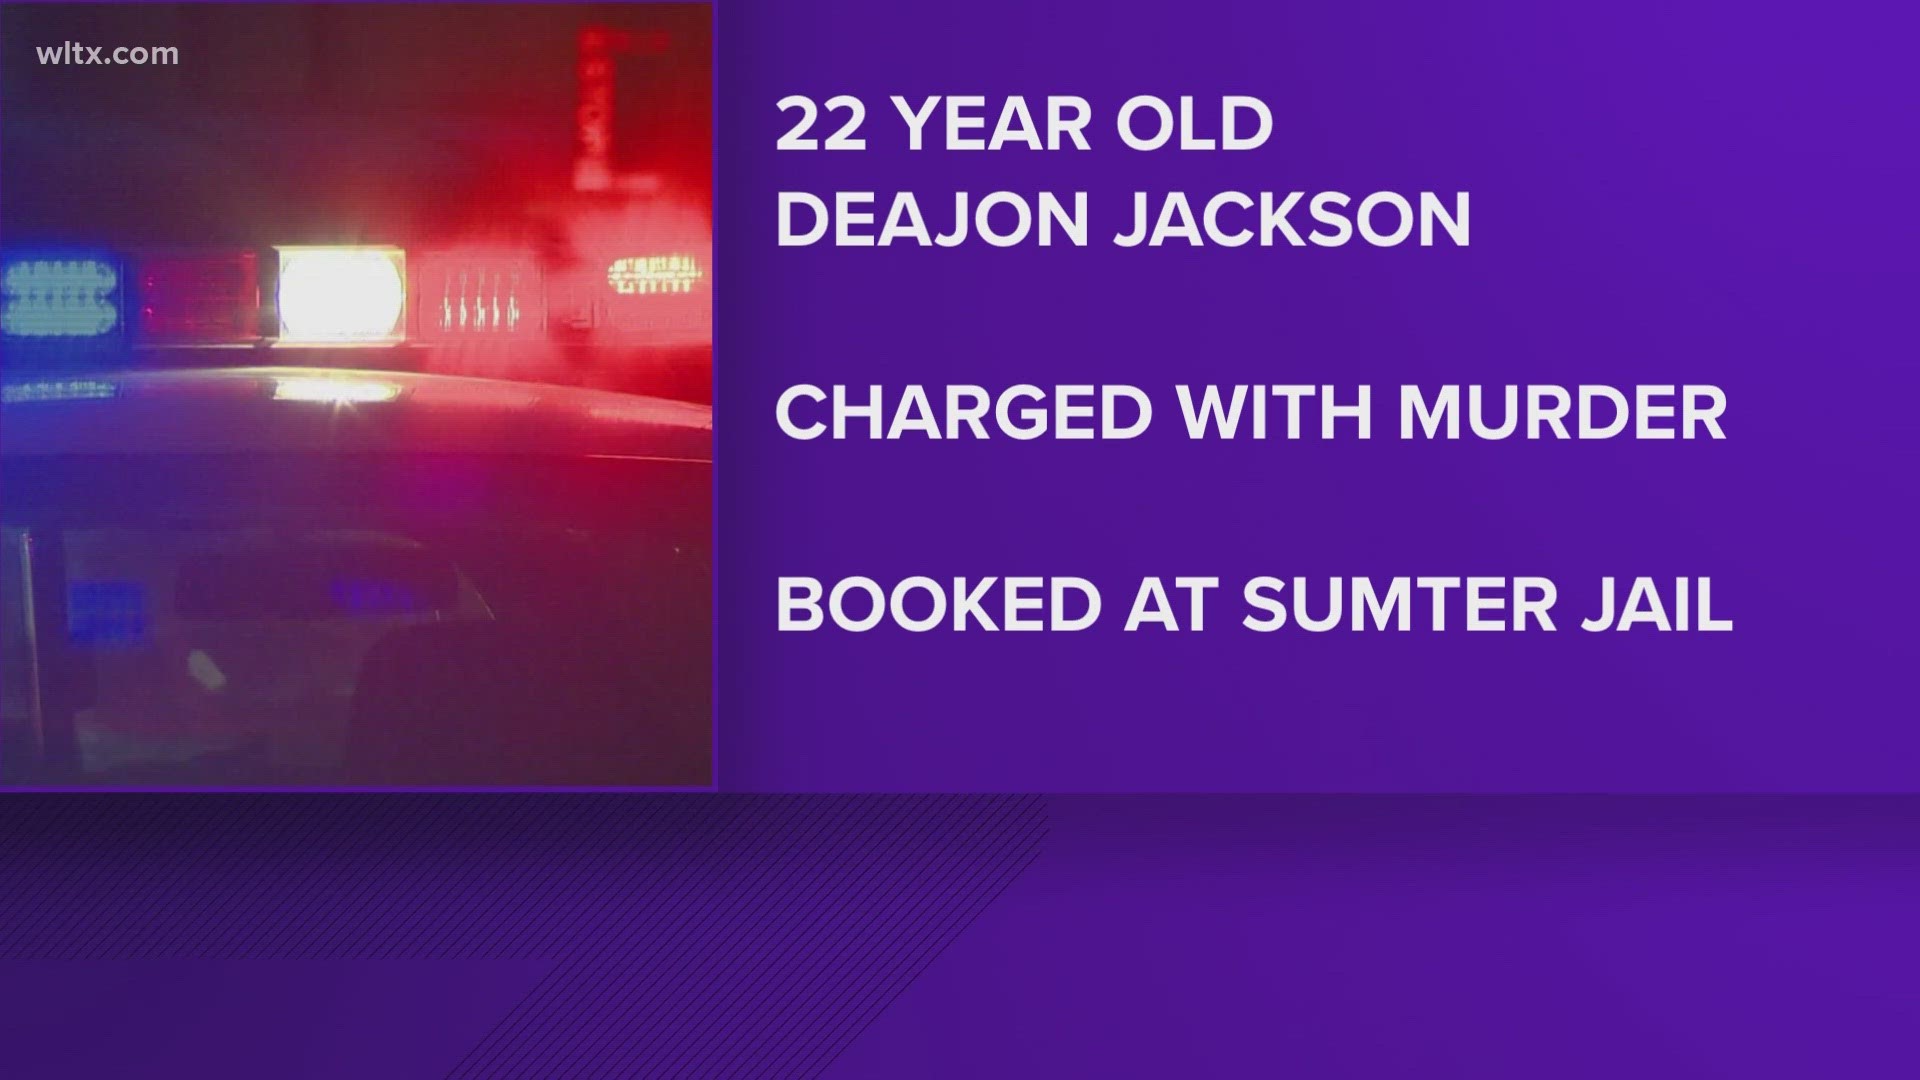 Investigators believe Deajon Jackson, 22, killed Frederick Nelson Jr. shooting him 12 times, wrapping his body in a tarp and dumping it in Sumter.